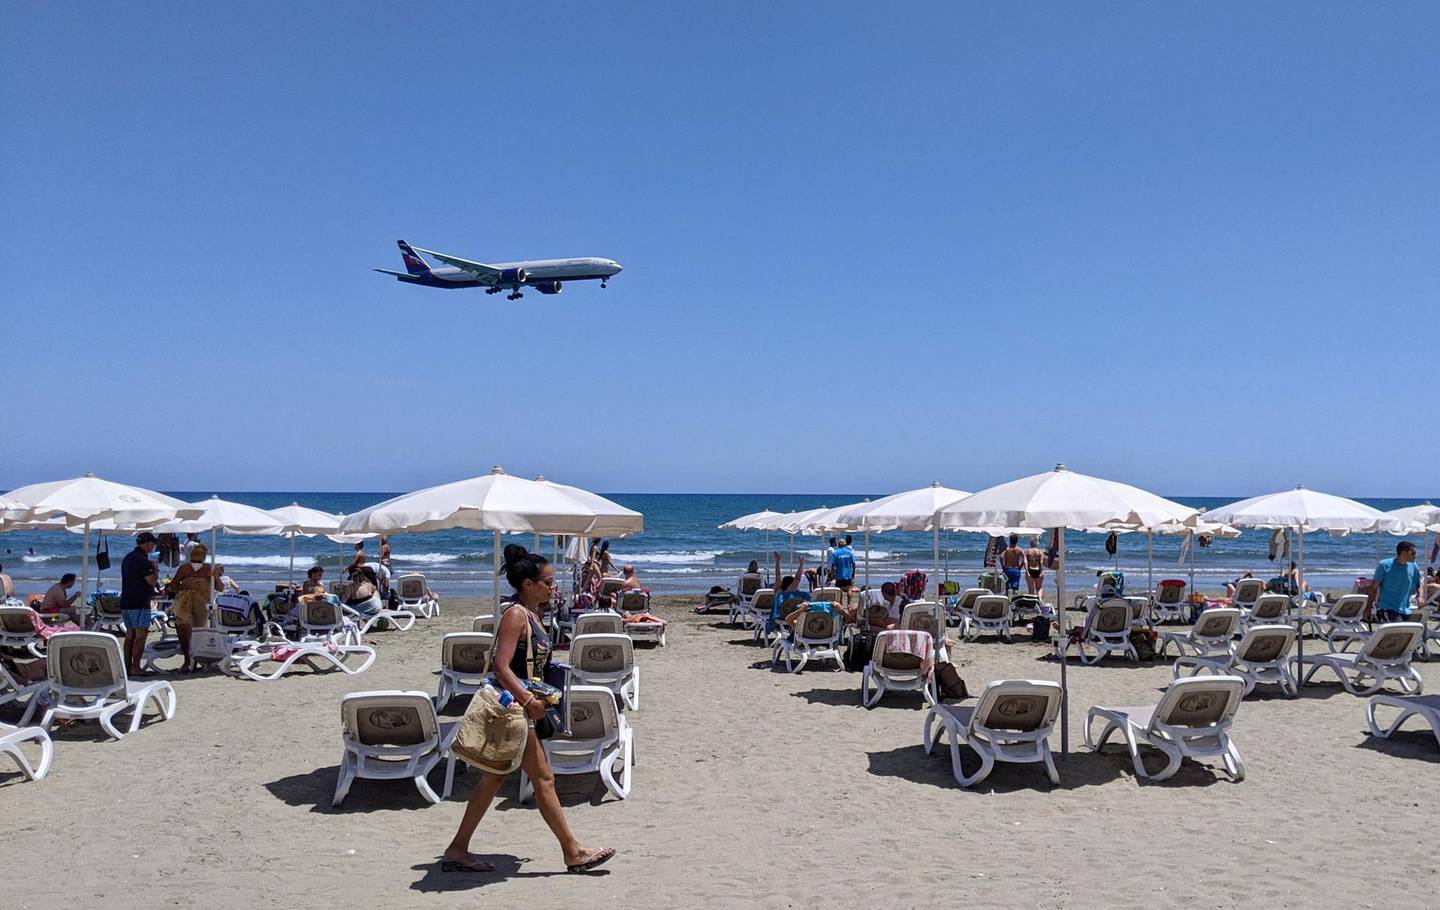 A passenger plane approaches Larnaca airport before landing as a woman walks past sunbeds at Makenzy Beach in the southern Cypriot port city on May 23, 2021. A 39-year-old British woman died in a Cypriot hospital as a result of  a blood clotting incident after receiving the AstraZeneca Covid-19 vaccine, the official Cyprus News Agency said May 24, 2021. / AFP / Etienne TORBEY
